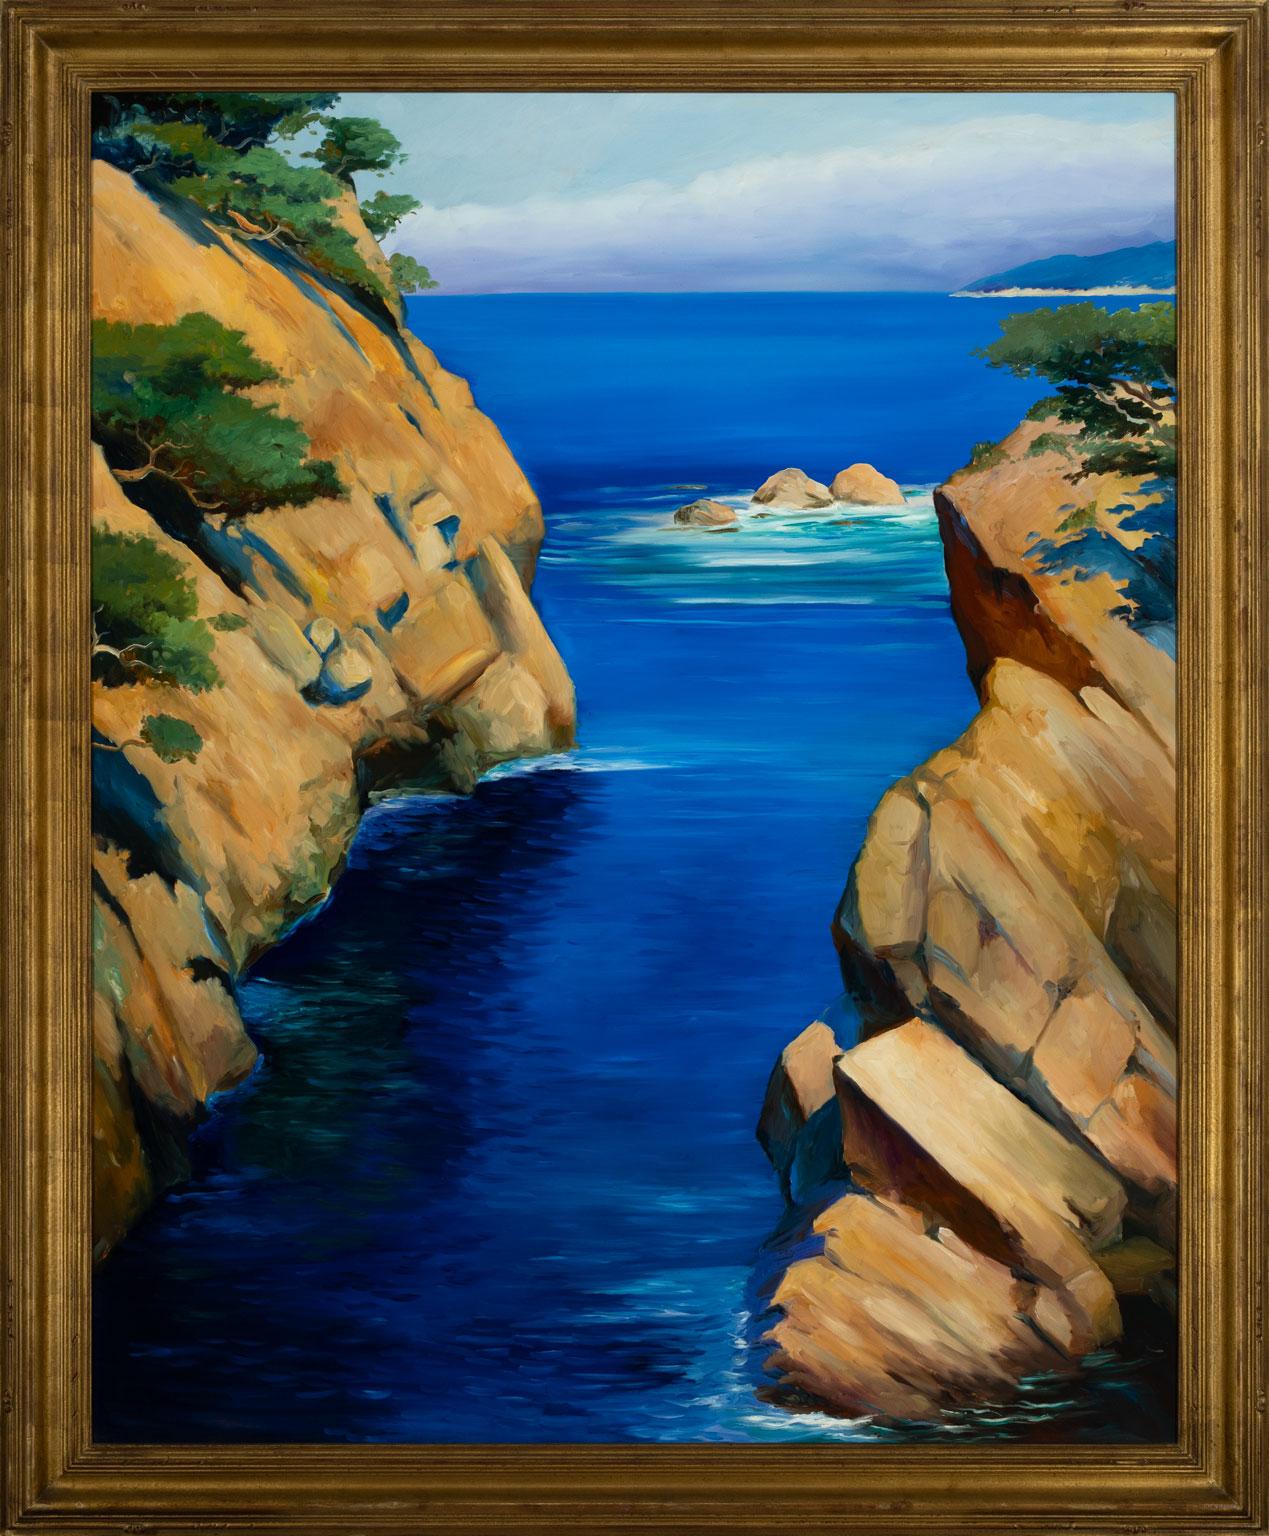 Robert Kenneth White Landscape Painting - [California Coast I] Large Scale Original Oil Painting by Robert White, Framed